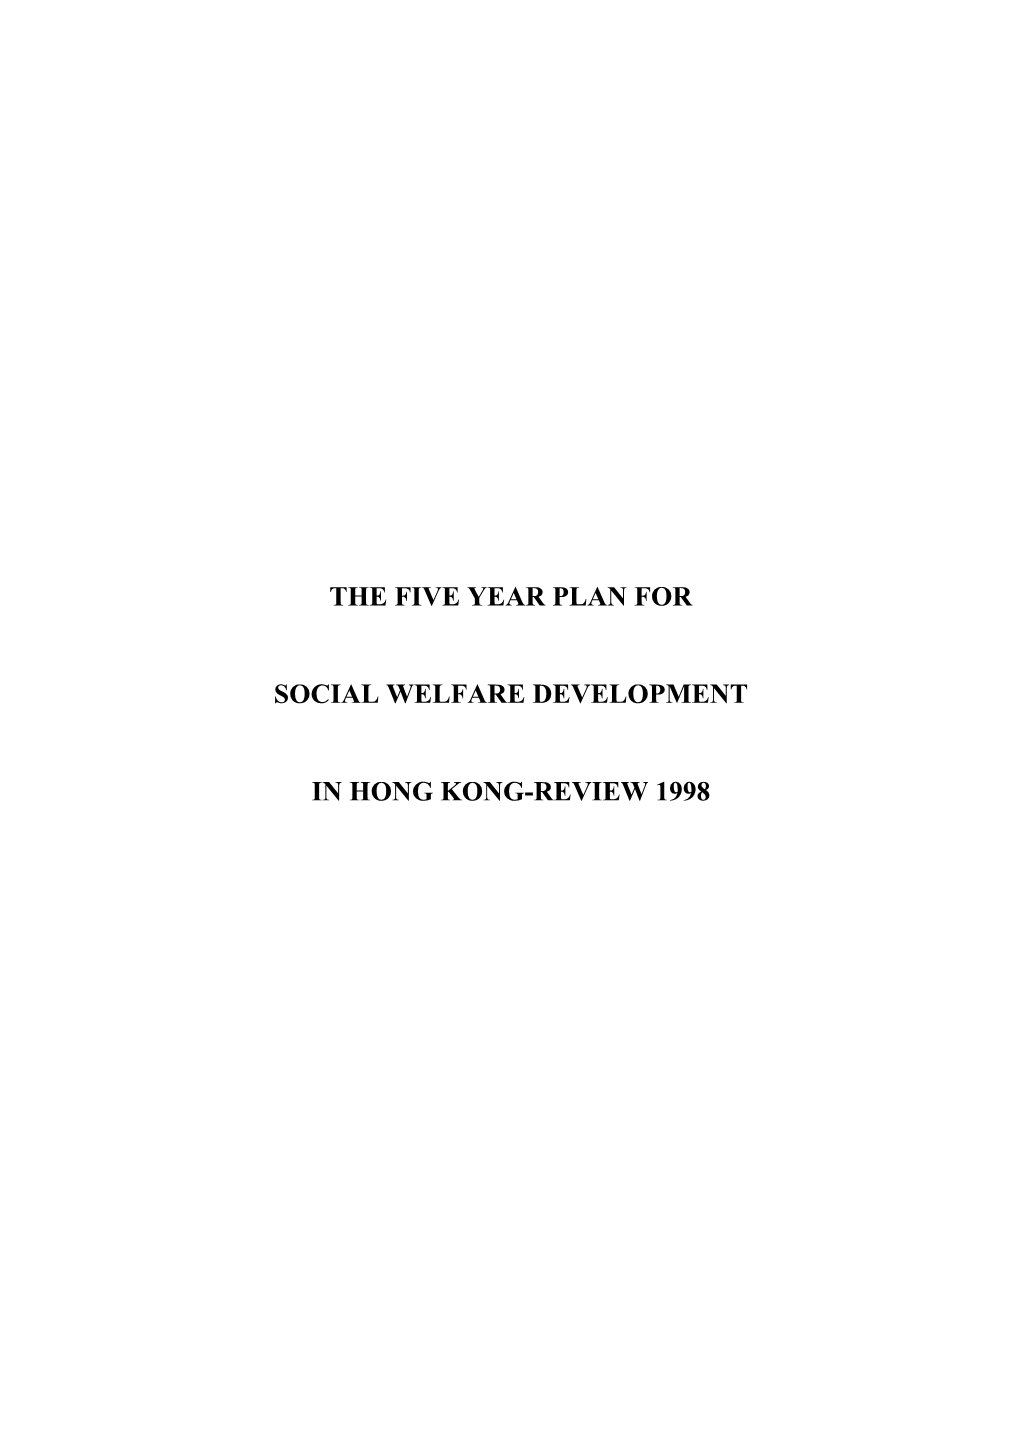 The Five Year Plan for Social Welfare Development in Hong Kong-Review